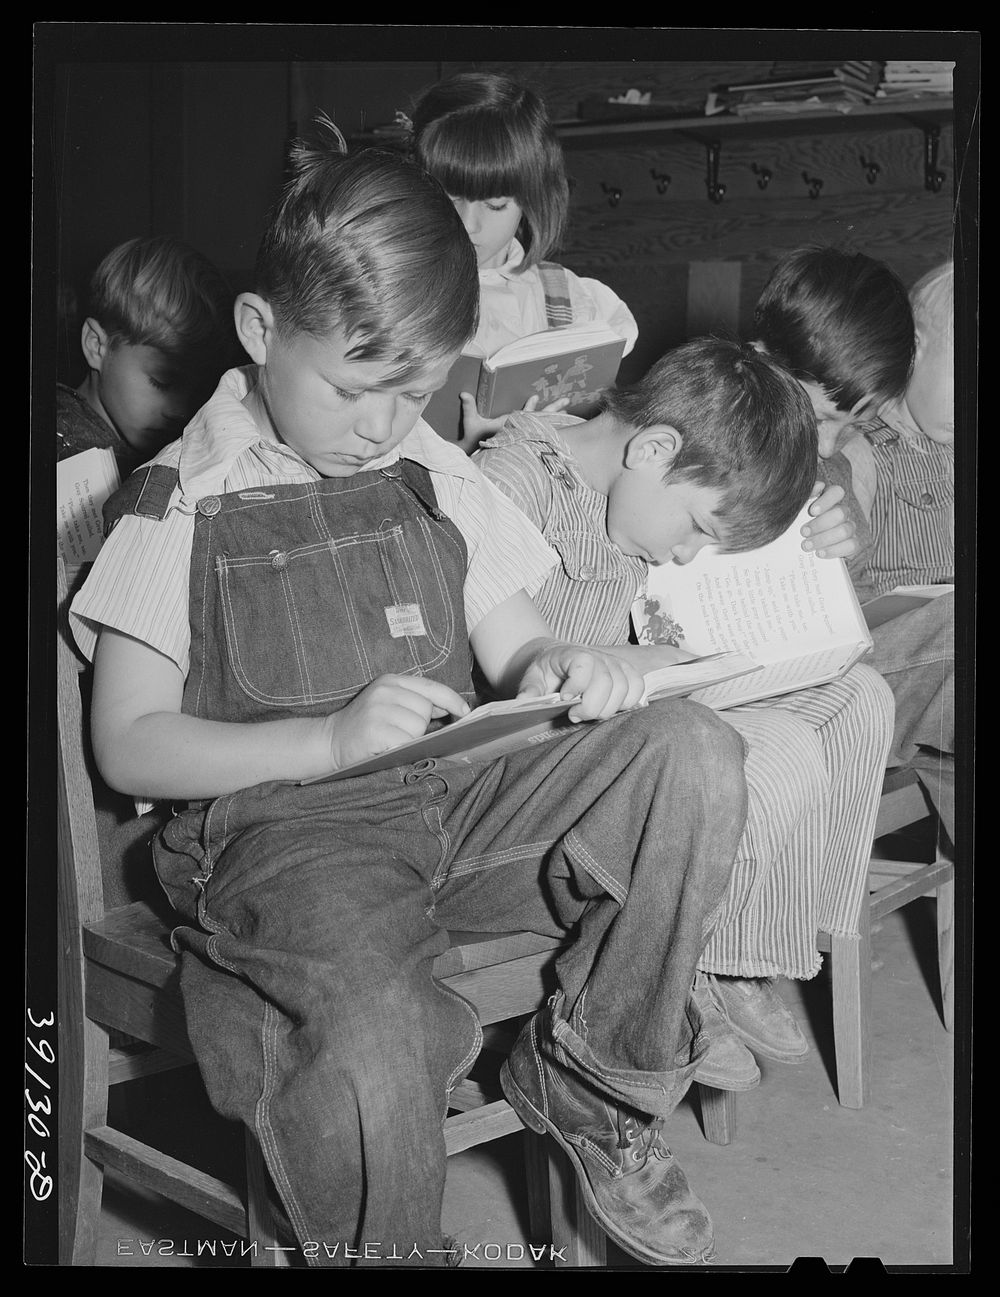 Schoolchildren at the FSA (Farm Security Administration) farm workers' camp. Caldwell, Idaho by Russell Lee